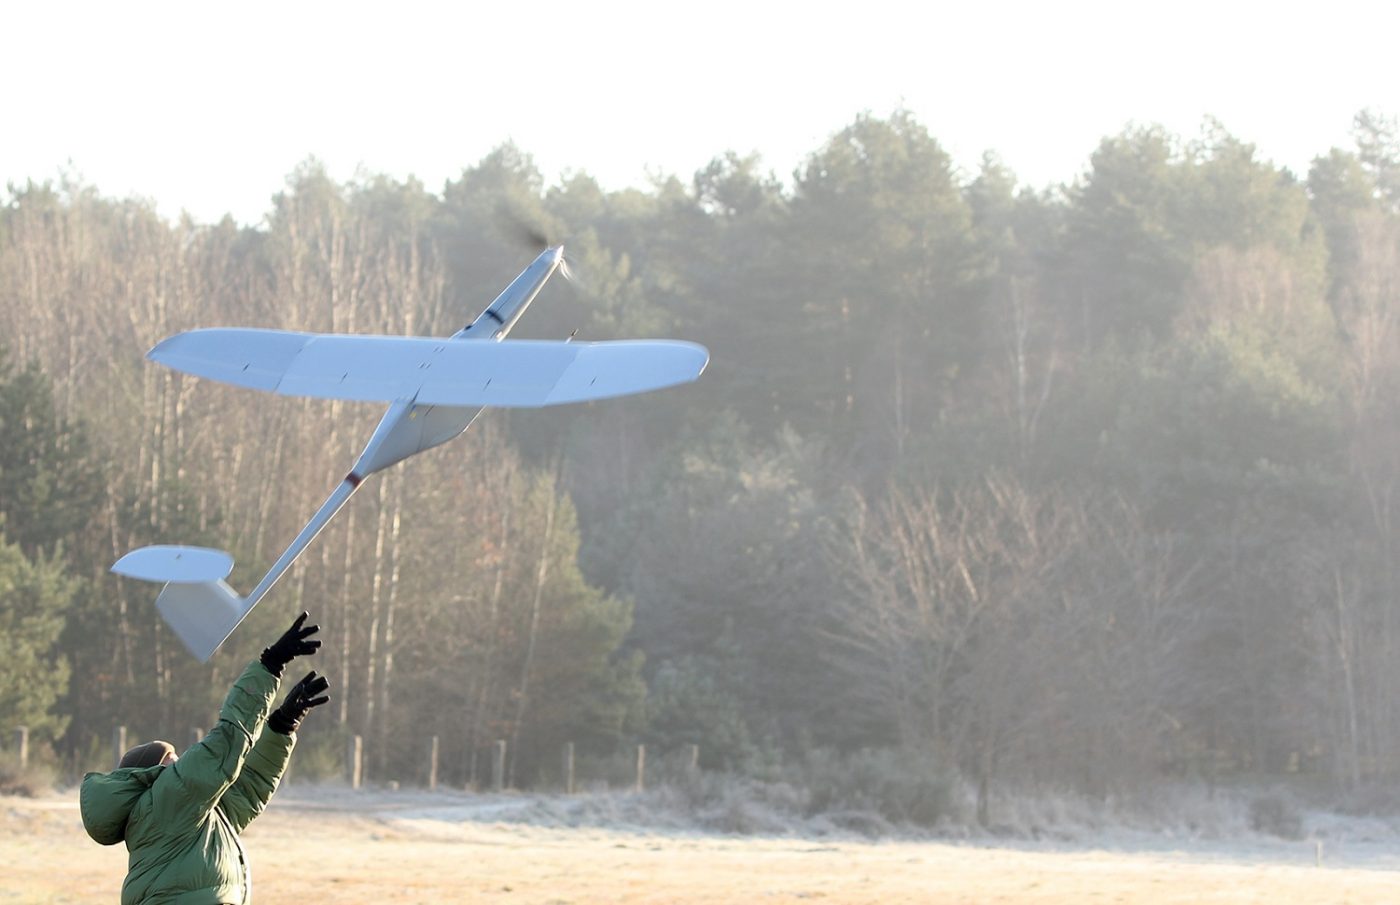 WB Groupâ€™s Unmanned Systems Help to Fight Against the Spread of Coronavirus